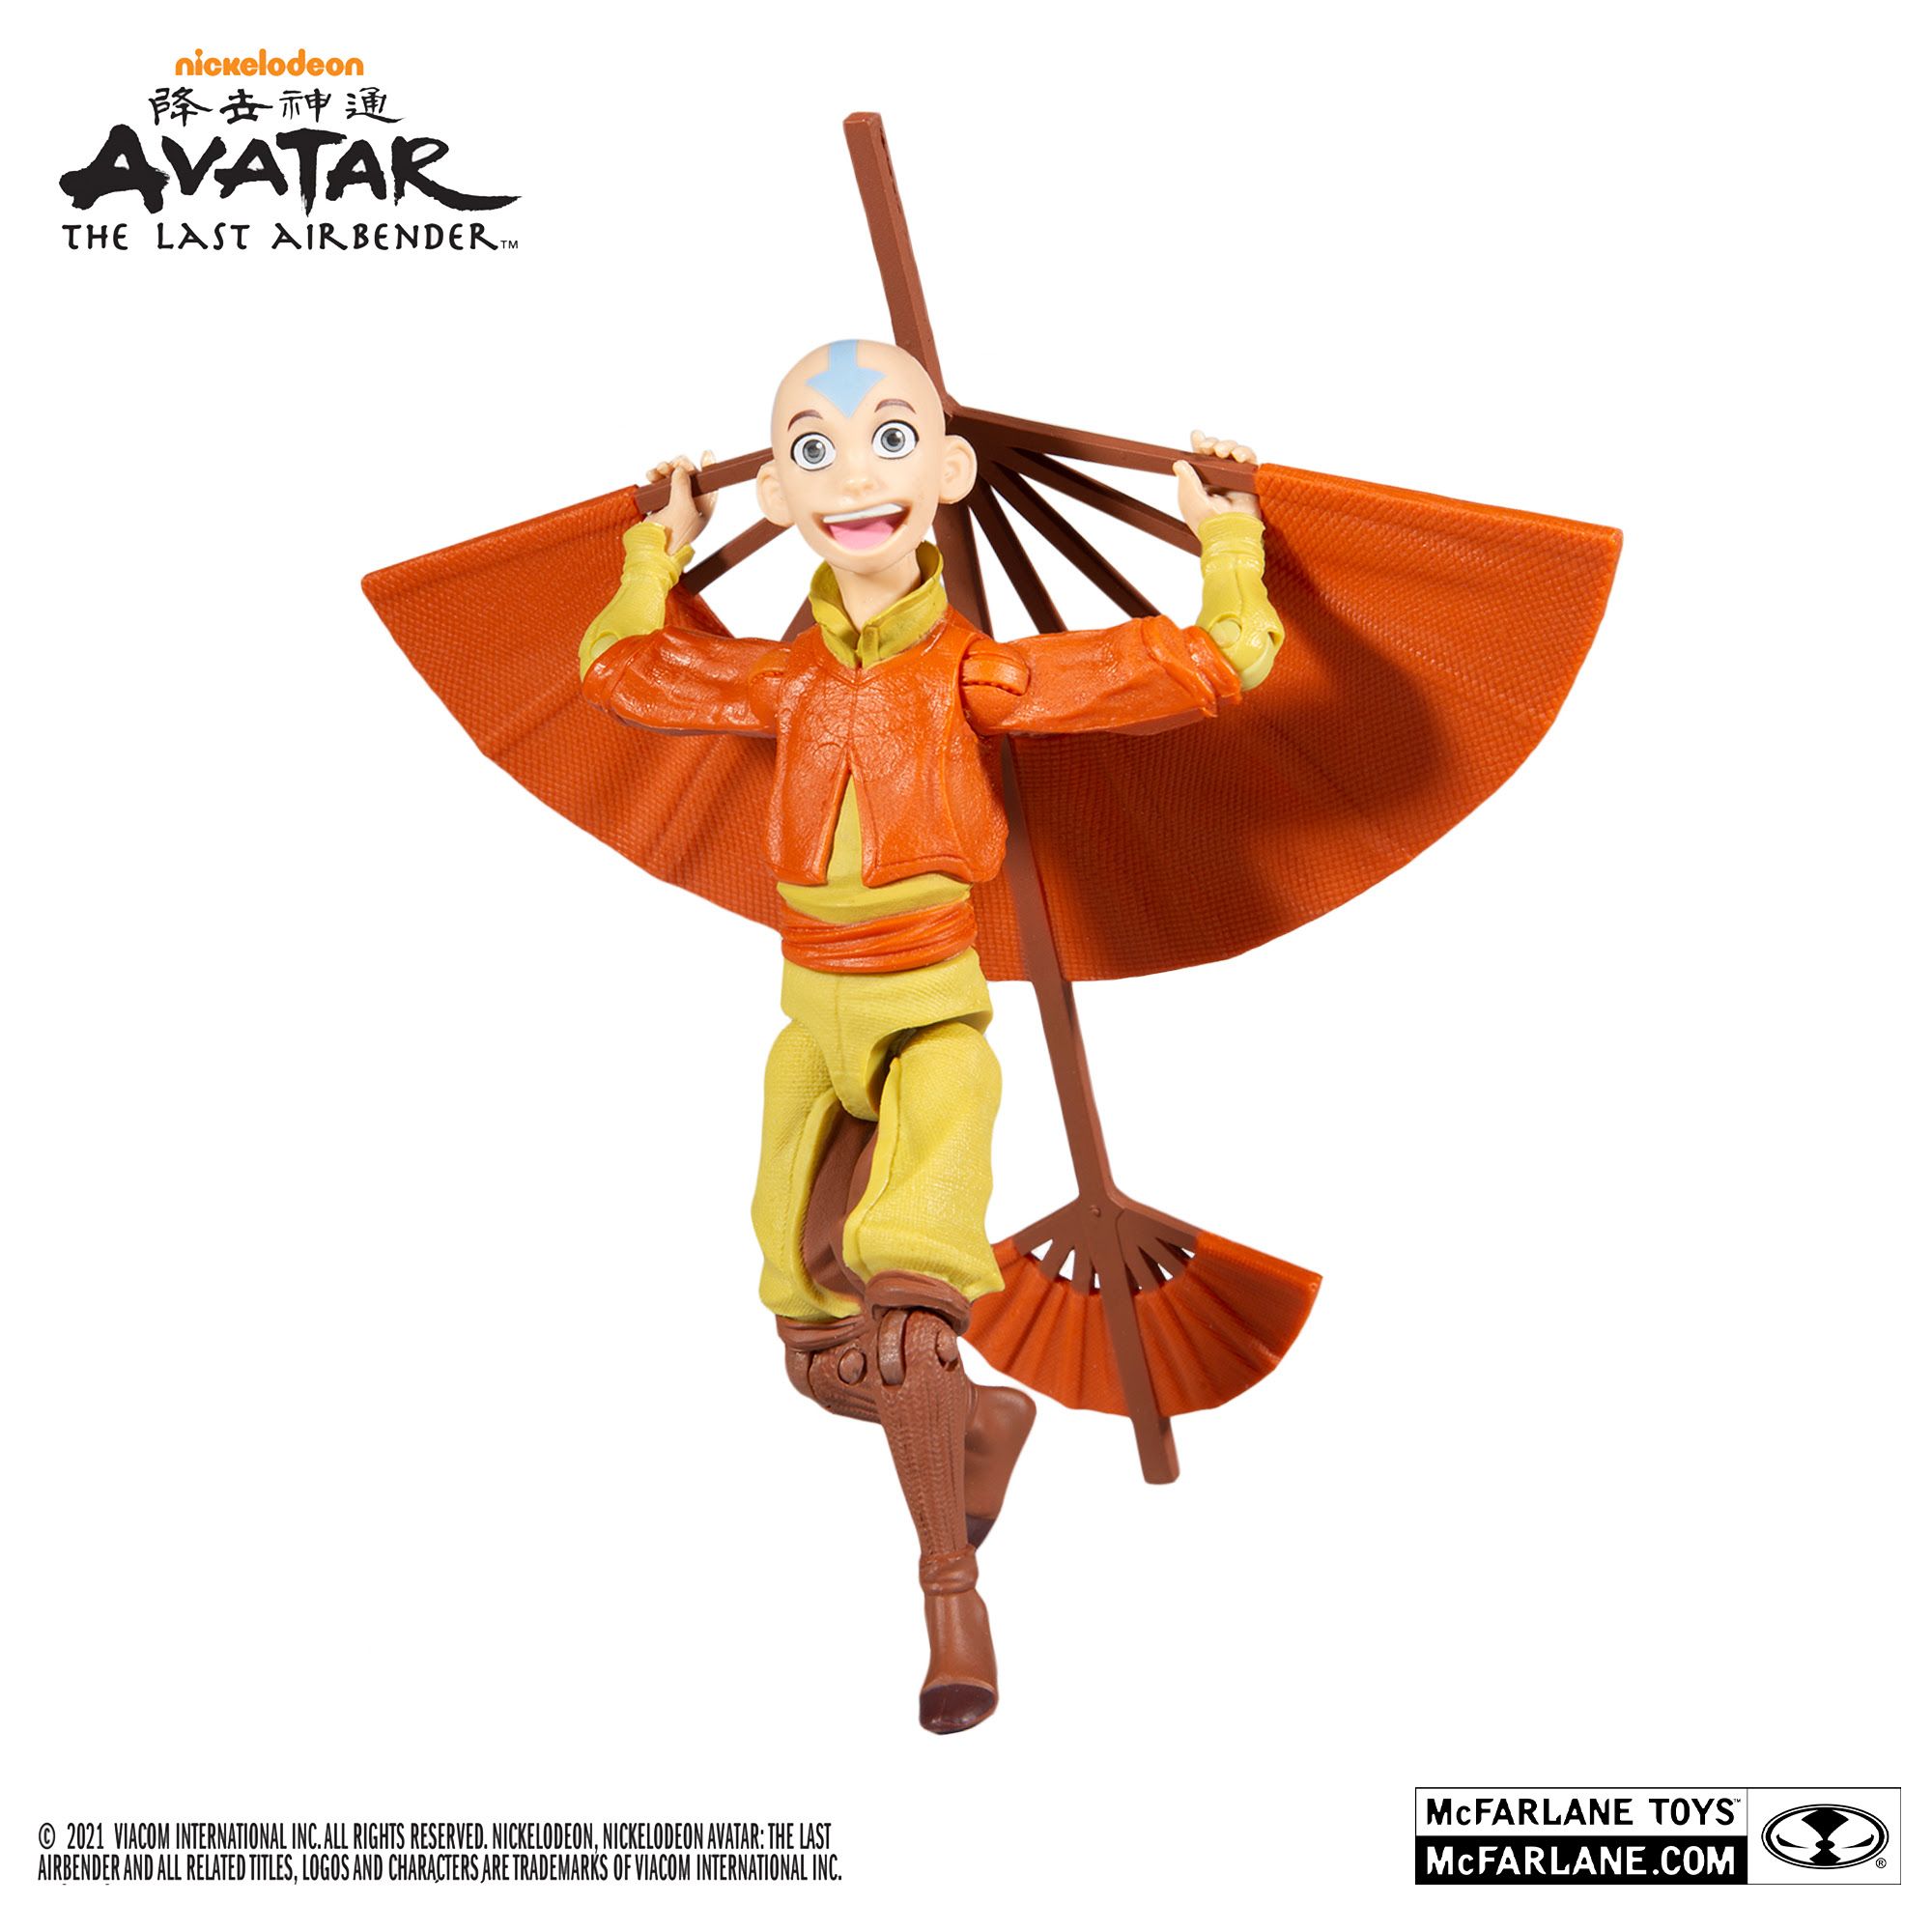 Avatar: The Last Airbender Aang with glider 5-inch McFarlane Toys figure